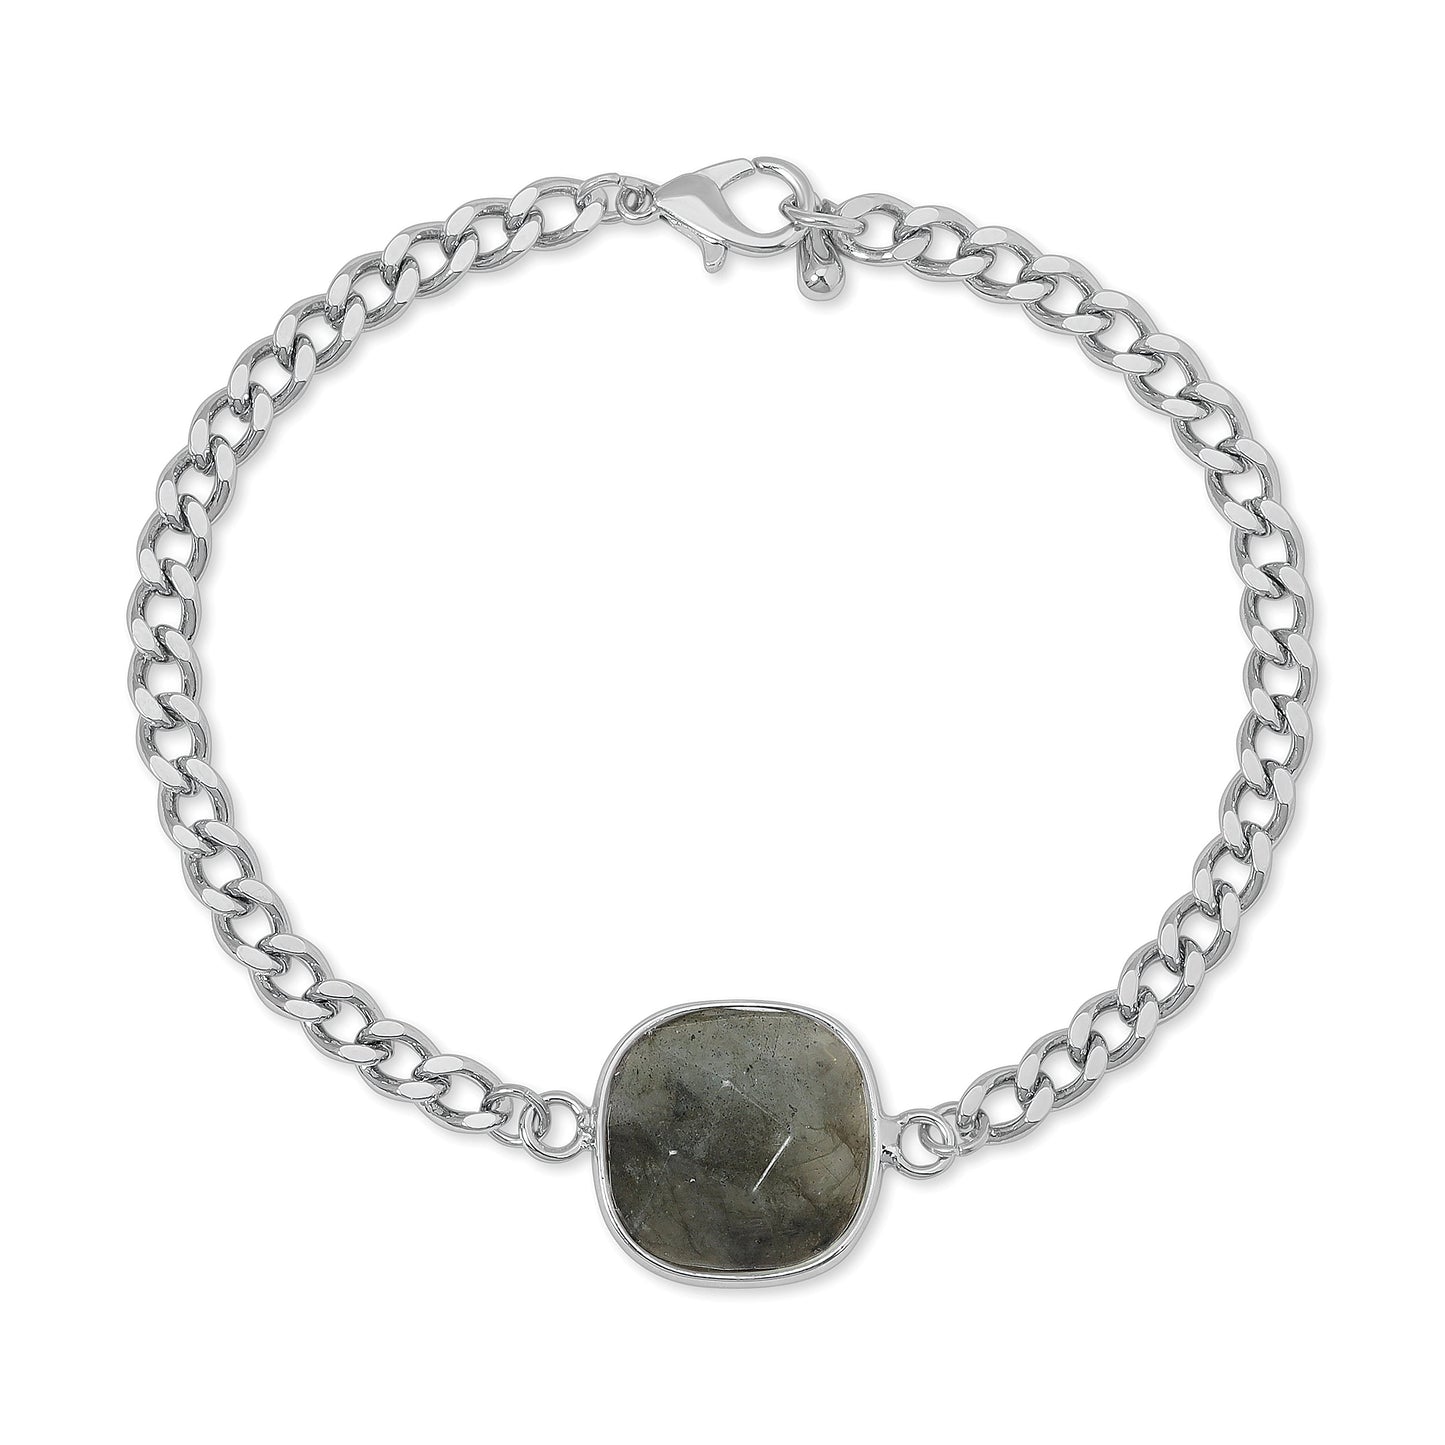 labradorite faceted stone with sterling silver plated curb chain bracelet